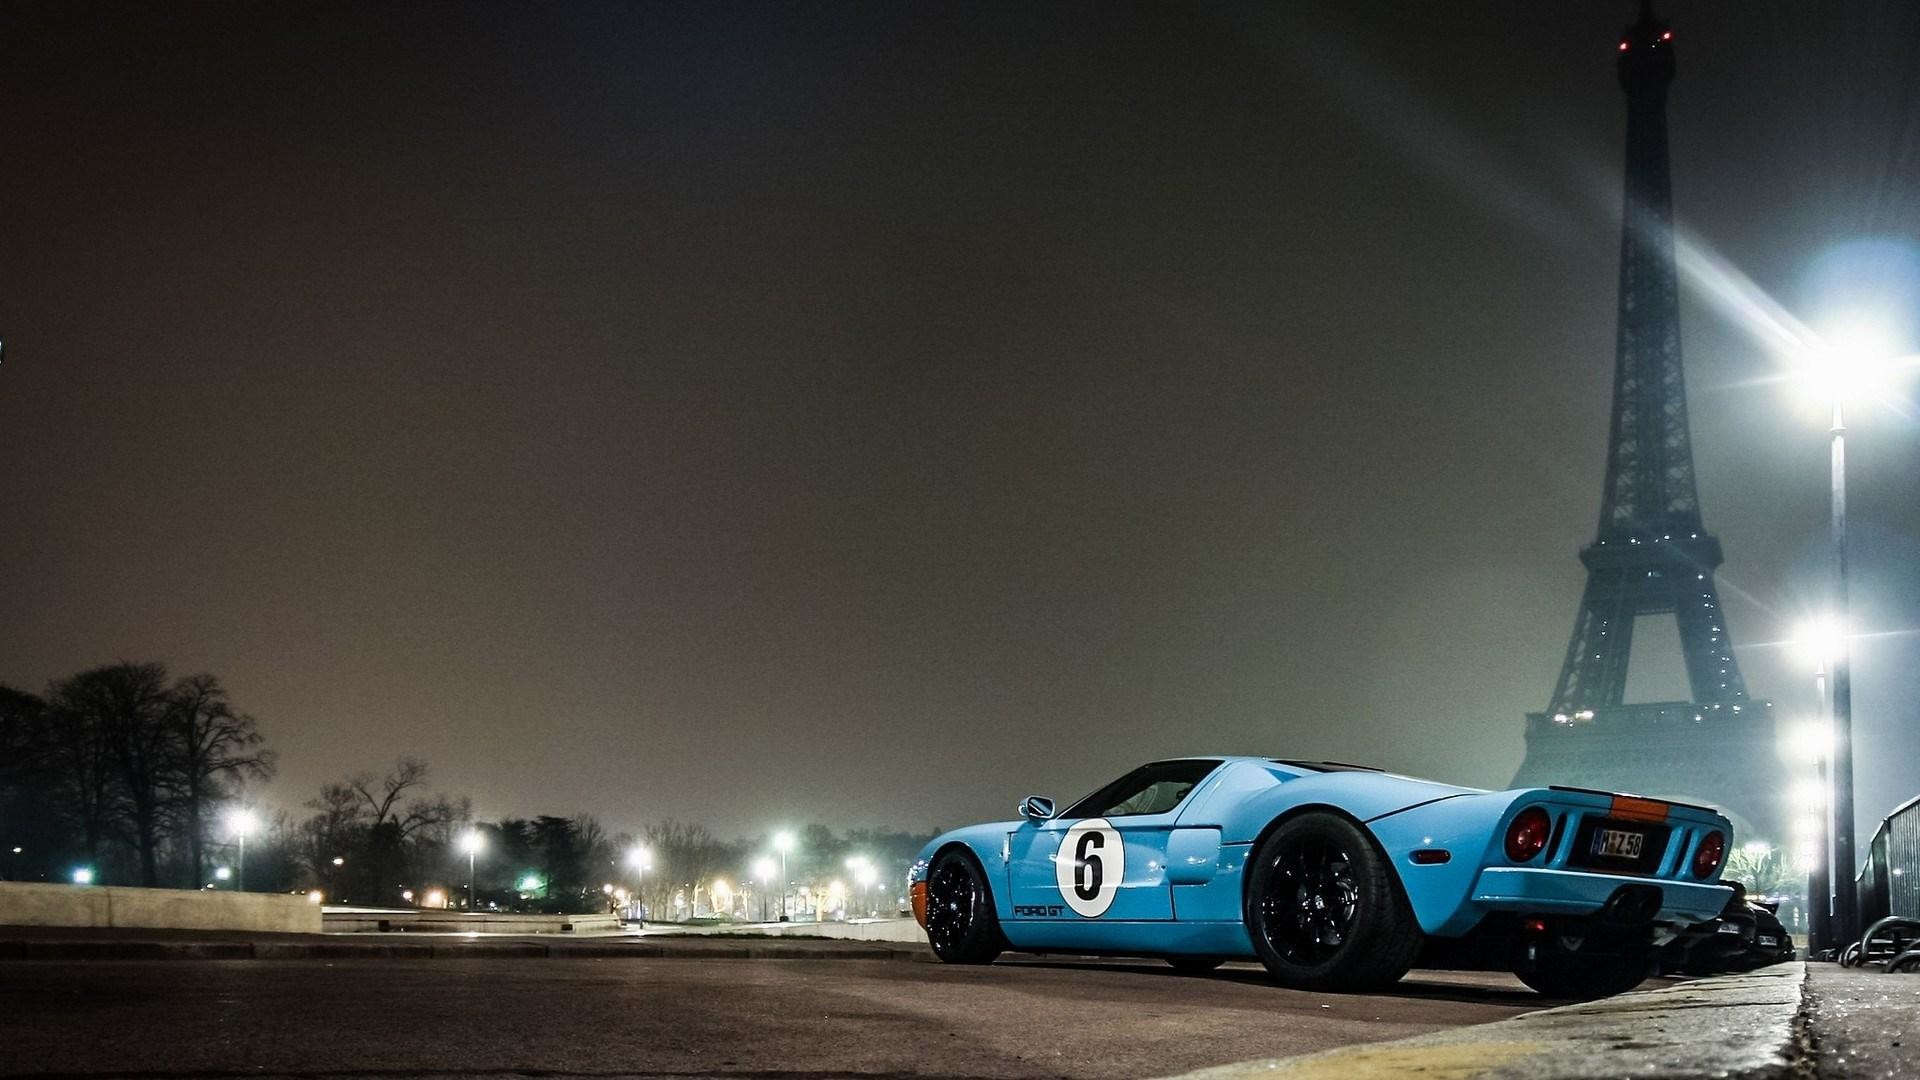 1920x1080 free-screensaver-for-ford-gt-1920-x-1080-